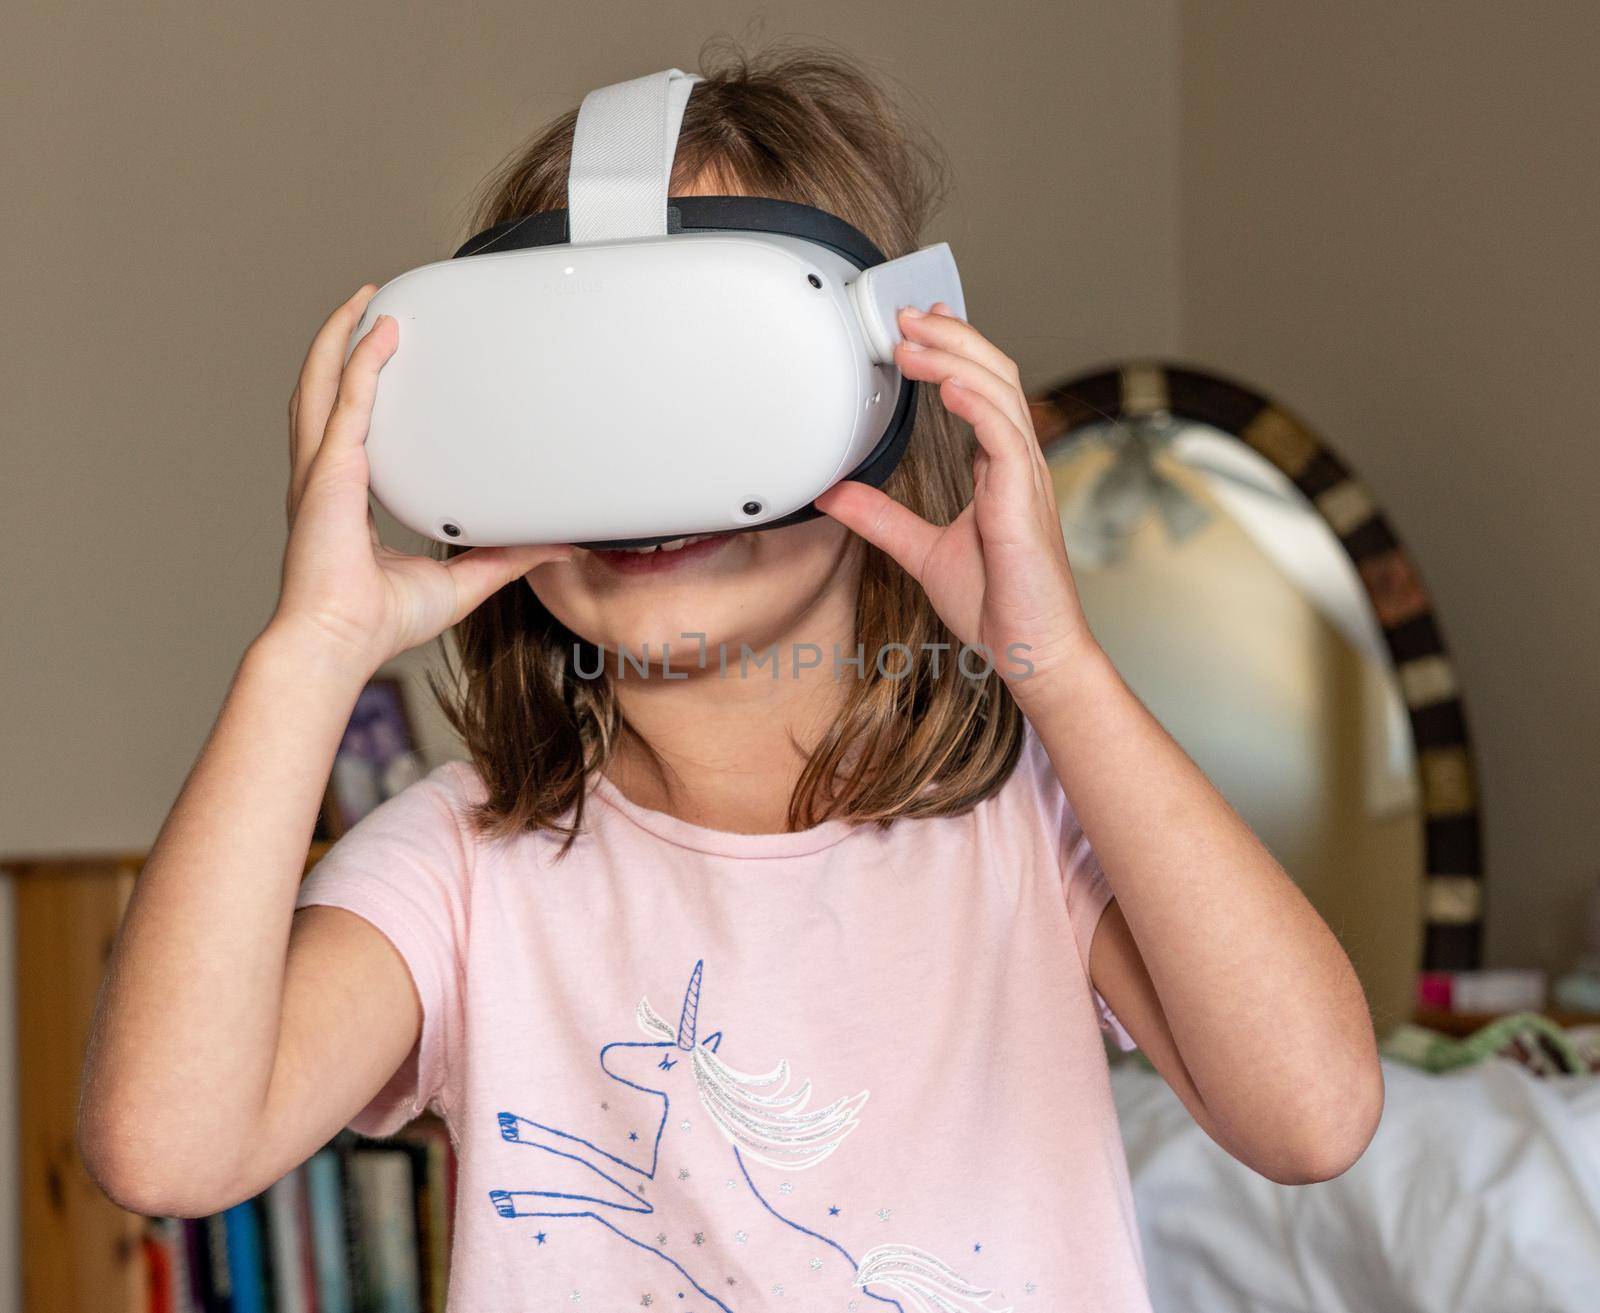 Young girl watching an app on a modern VR headset by steheap